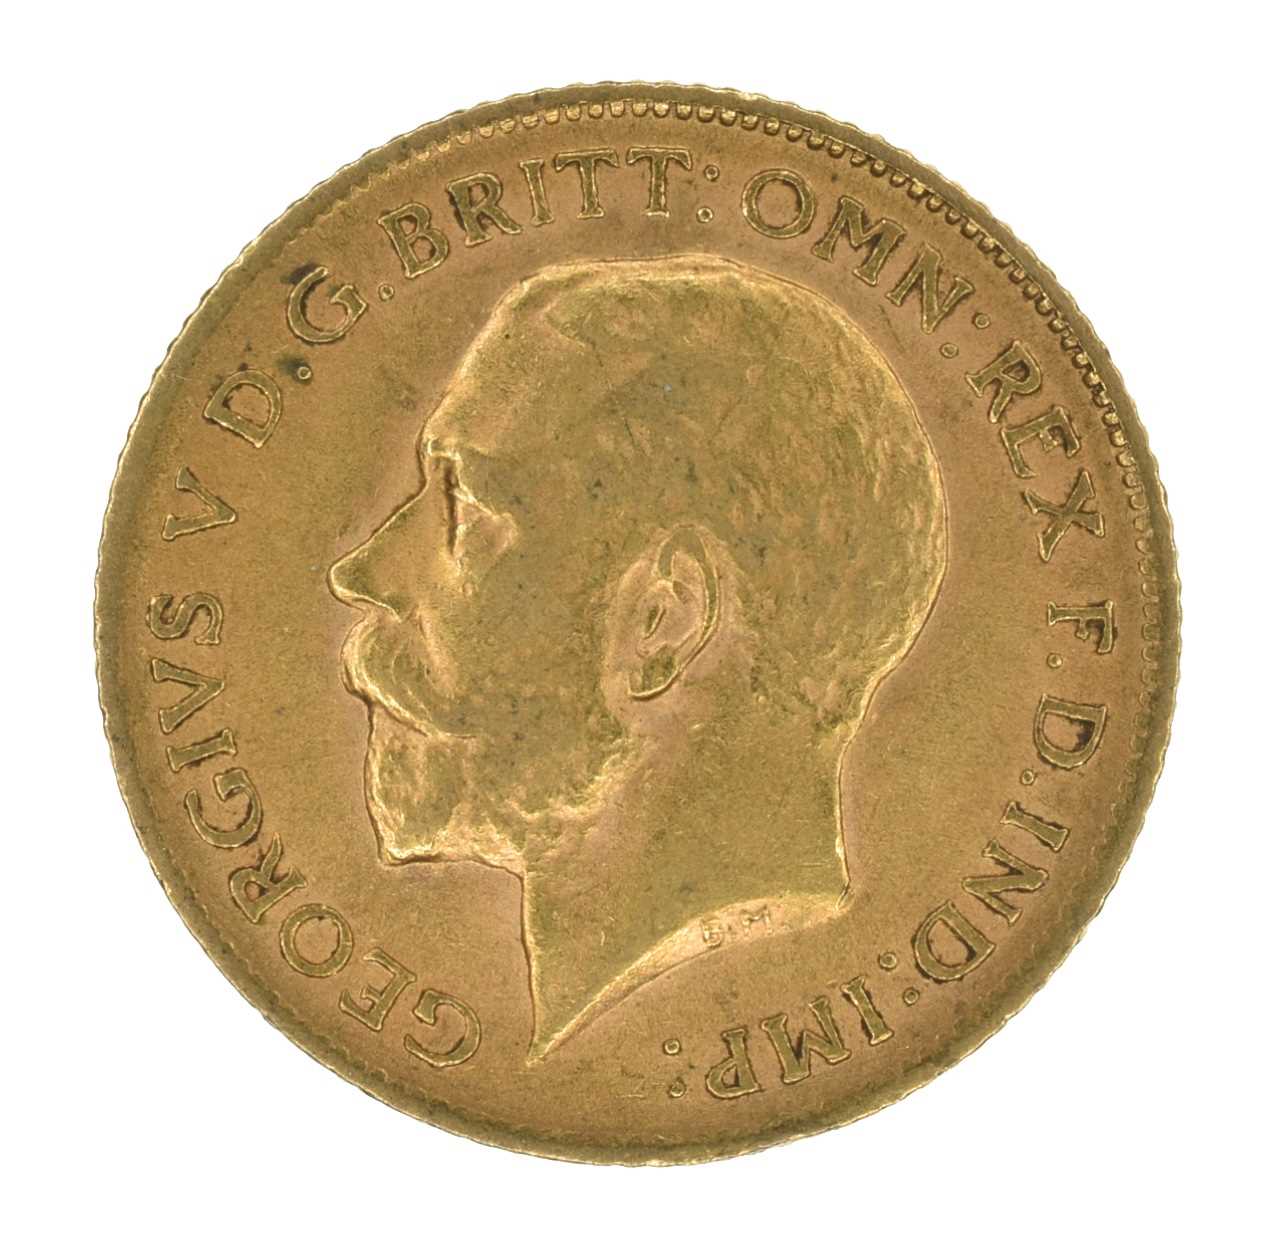 Lot 65 - Two King George V, Half-Sovereigns, 1911 and 1912, London Mint (2).